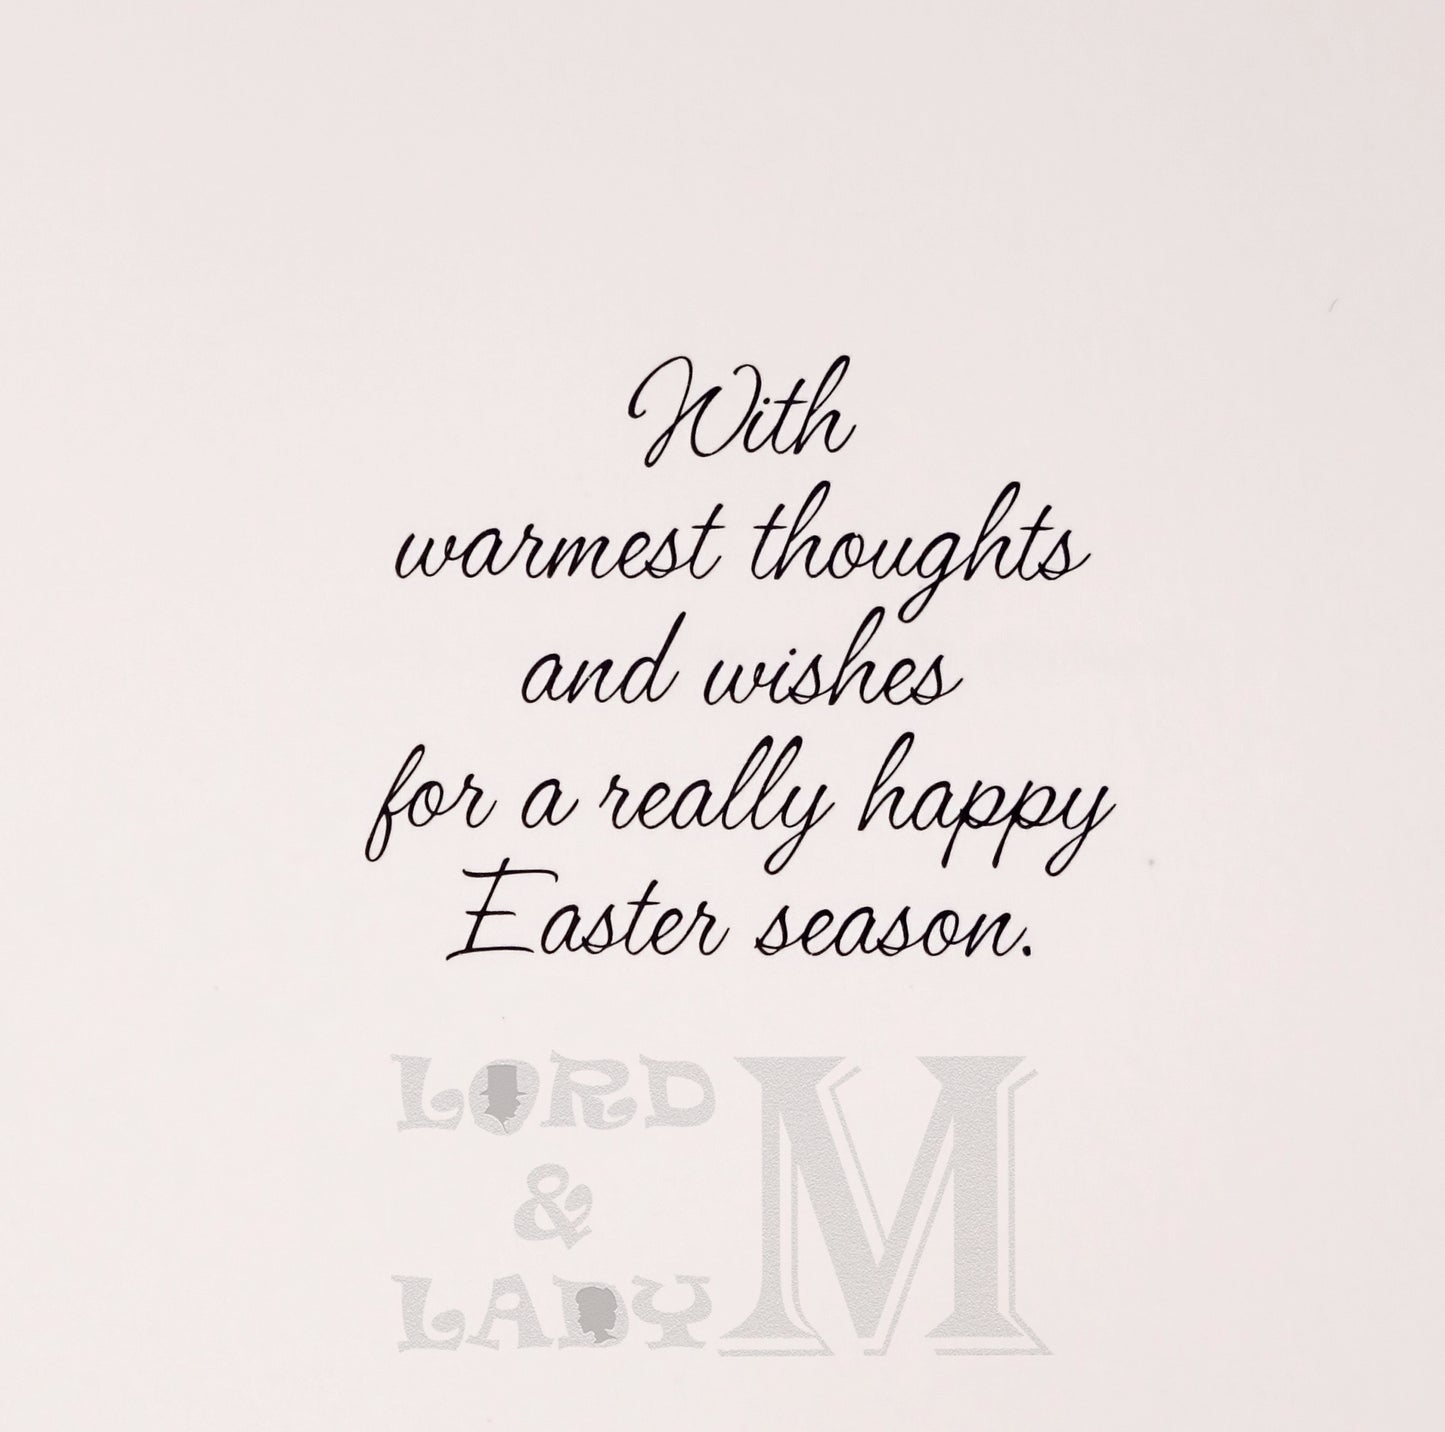 18cm - ... Across The Miles Easter Wishes - E